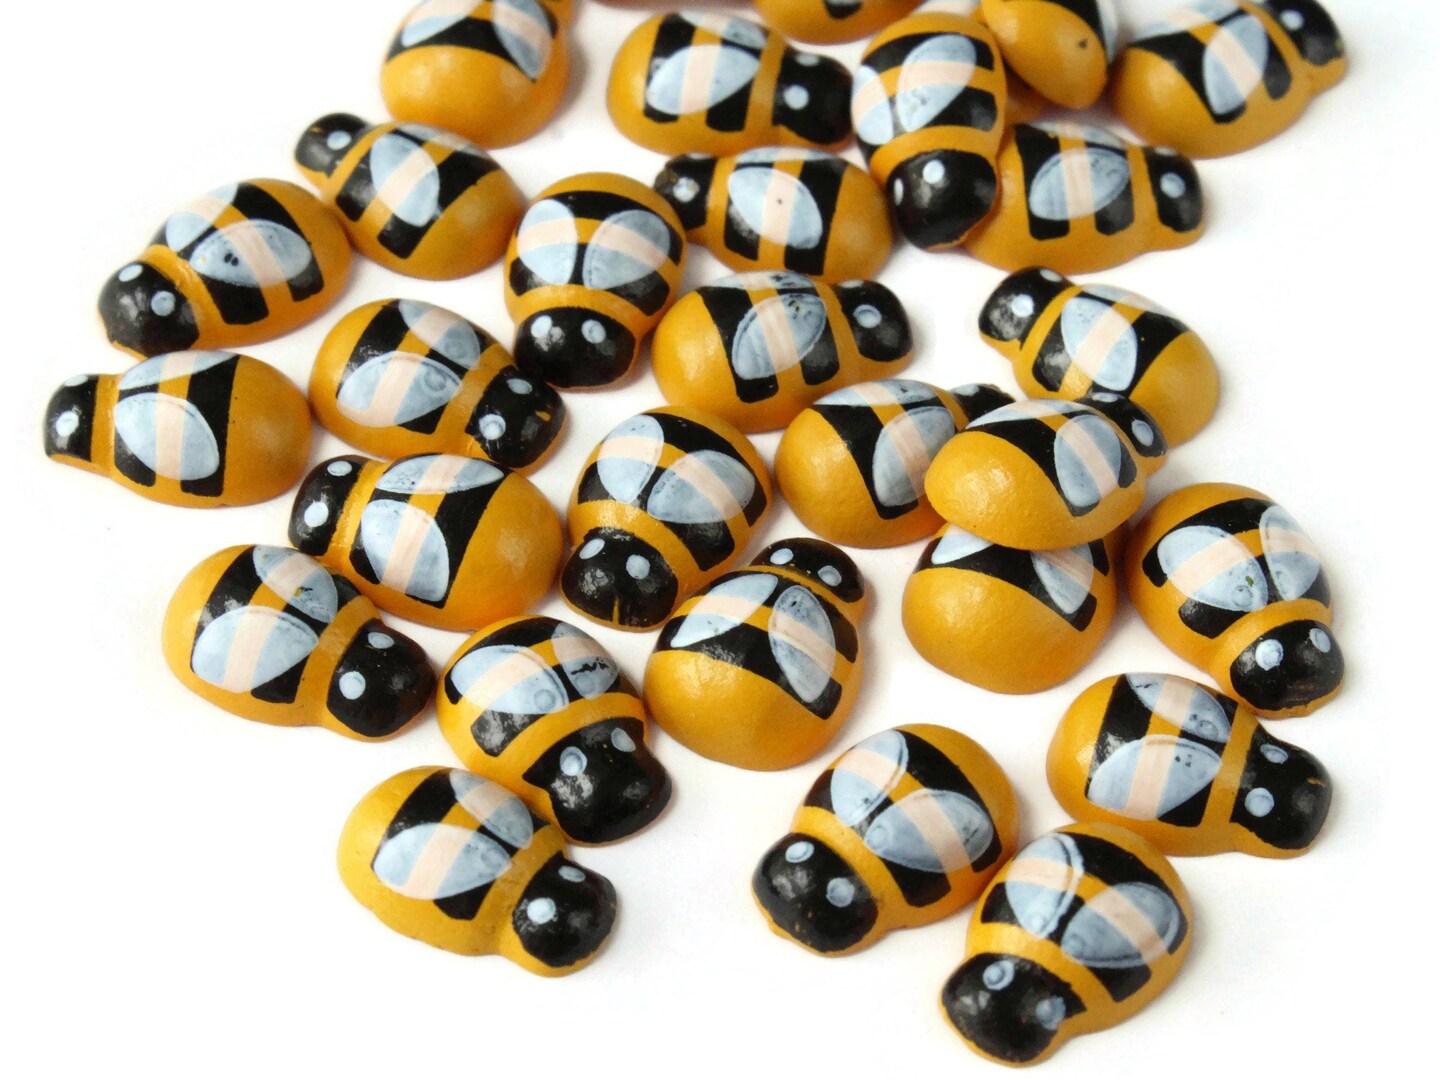 30 13mm Wooden Bee Cabochons - Flat Back Bumblebee Cabochons 1185